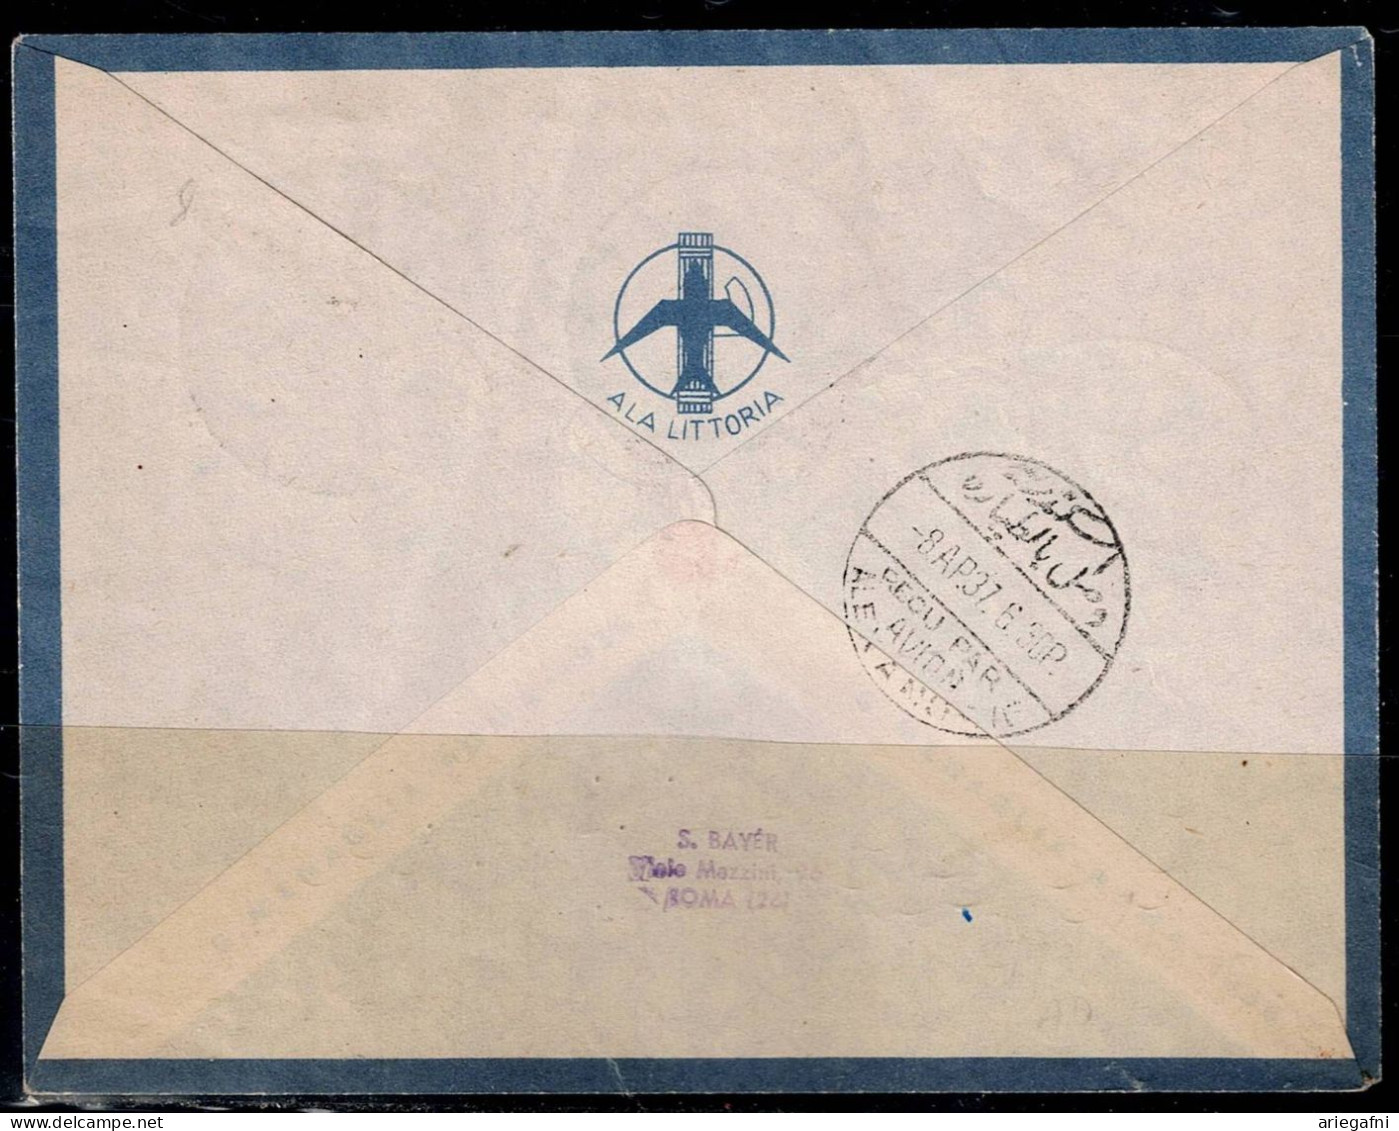 ISRAEL 1937 COVER FLYING BY AIR MAIL IN7/4/37 FROM ROMA VIA HAIFA TO ALESSANDRIA VF!! - Poste Aérienne